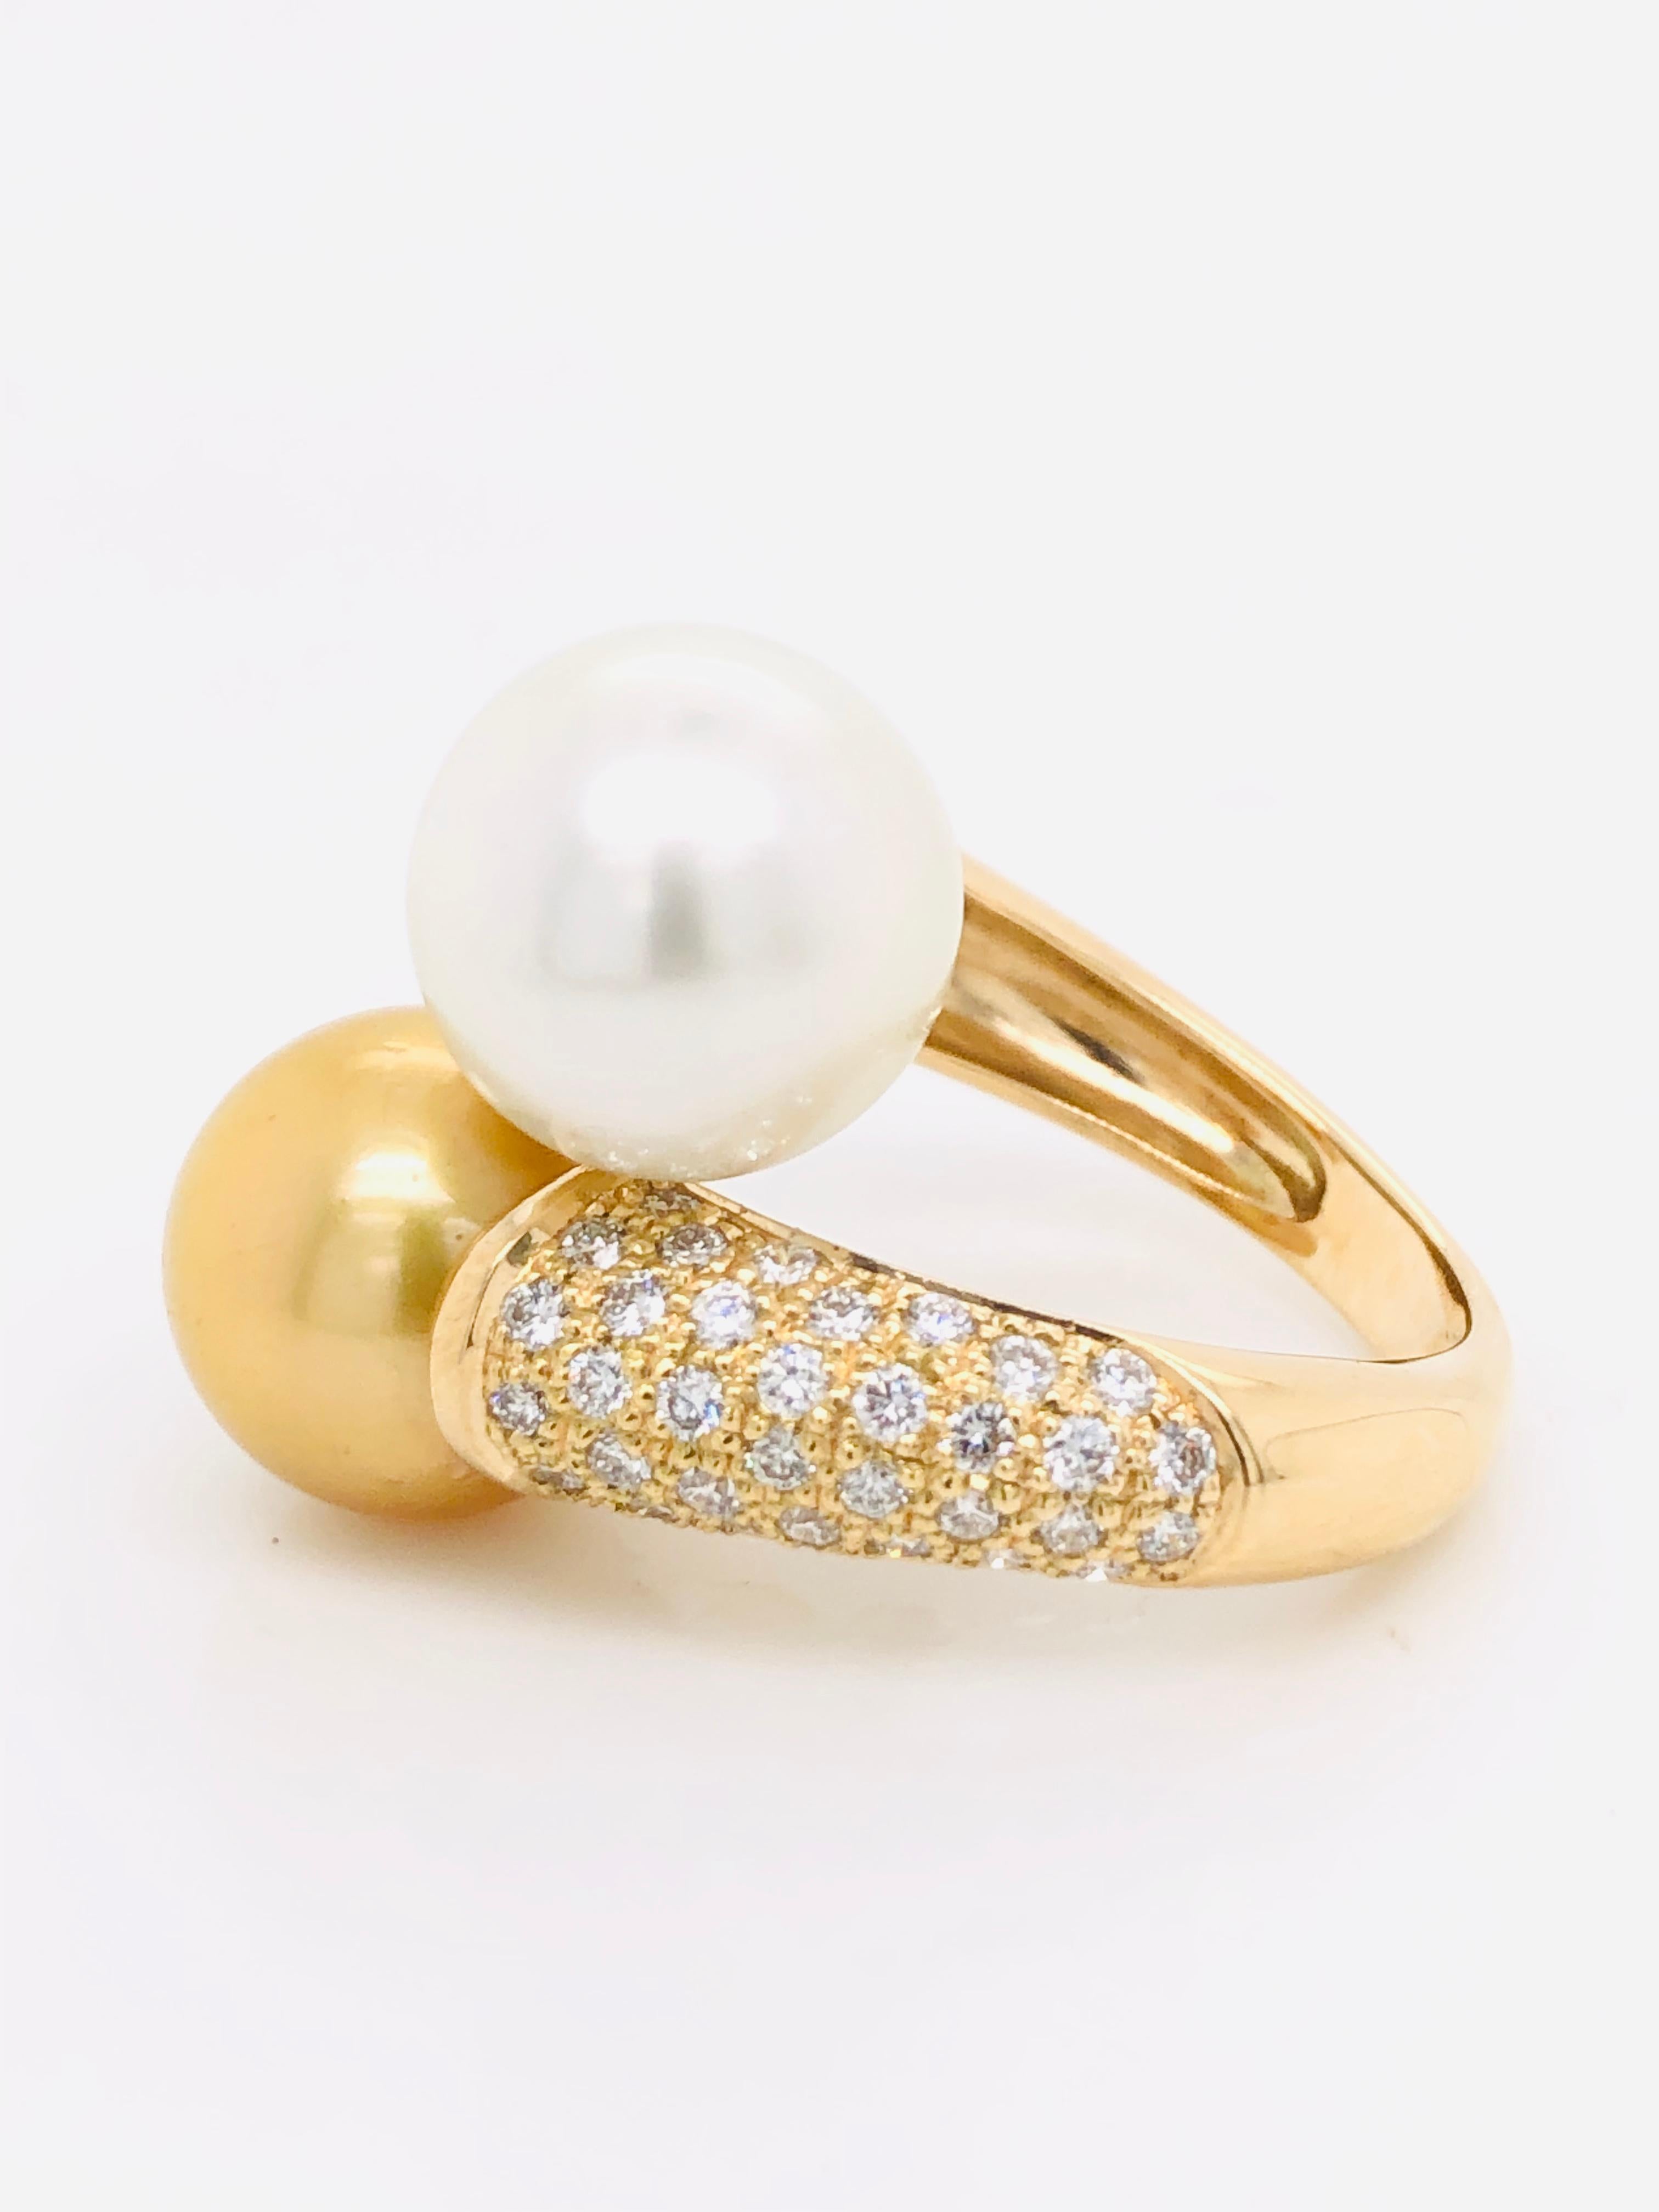 South Sea Pearls with White Diamonds on Gold 18 Carat Ring 2